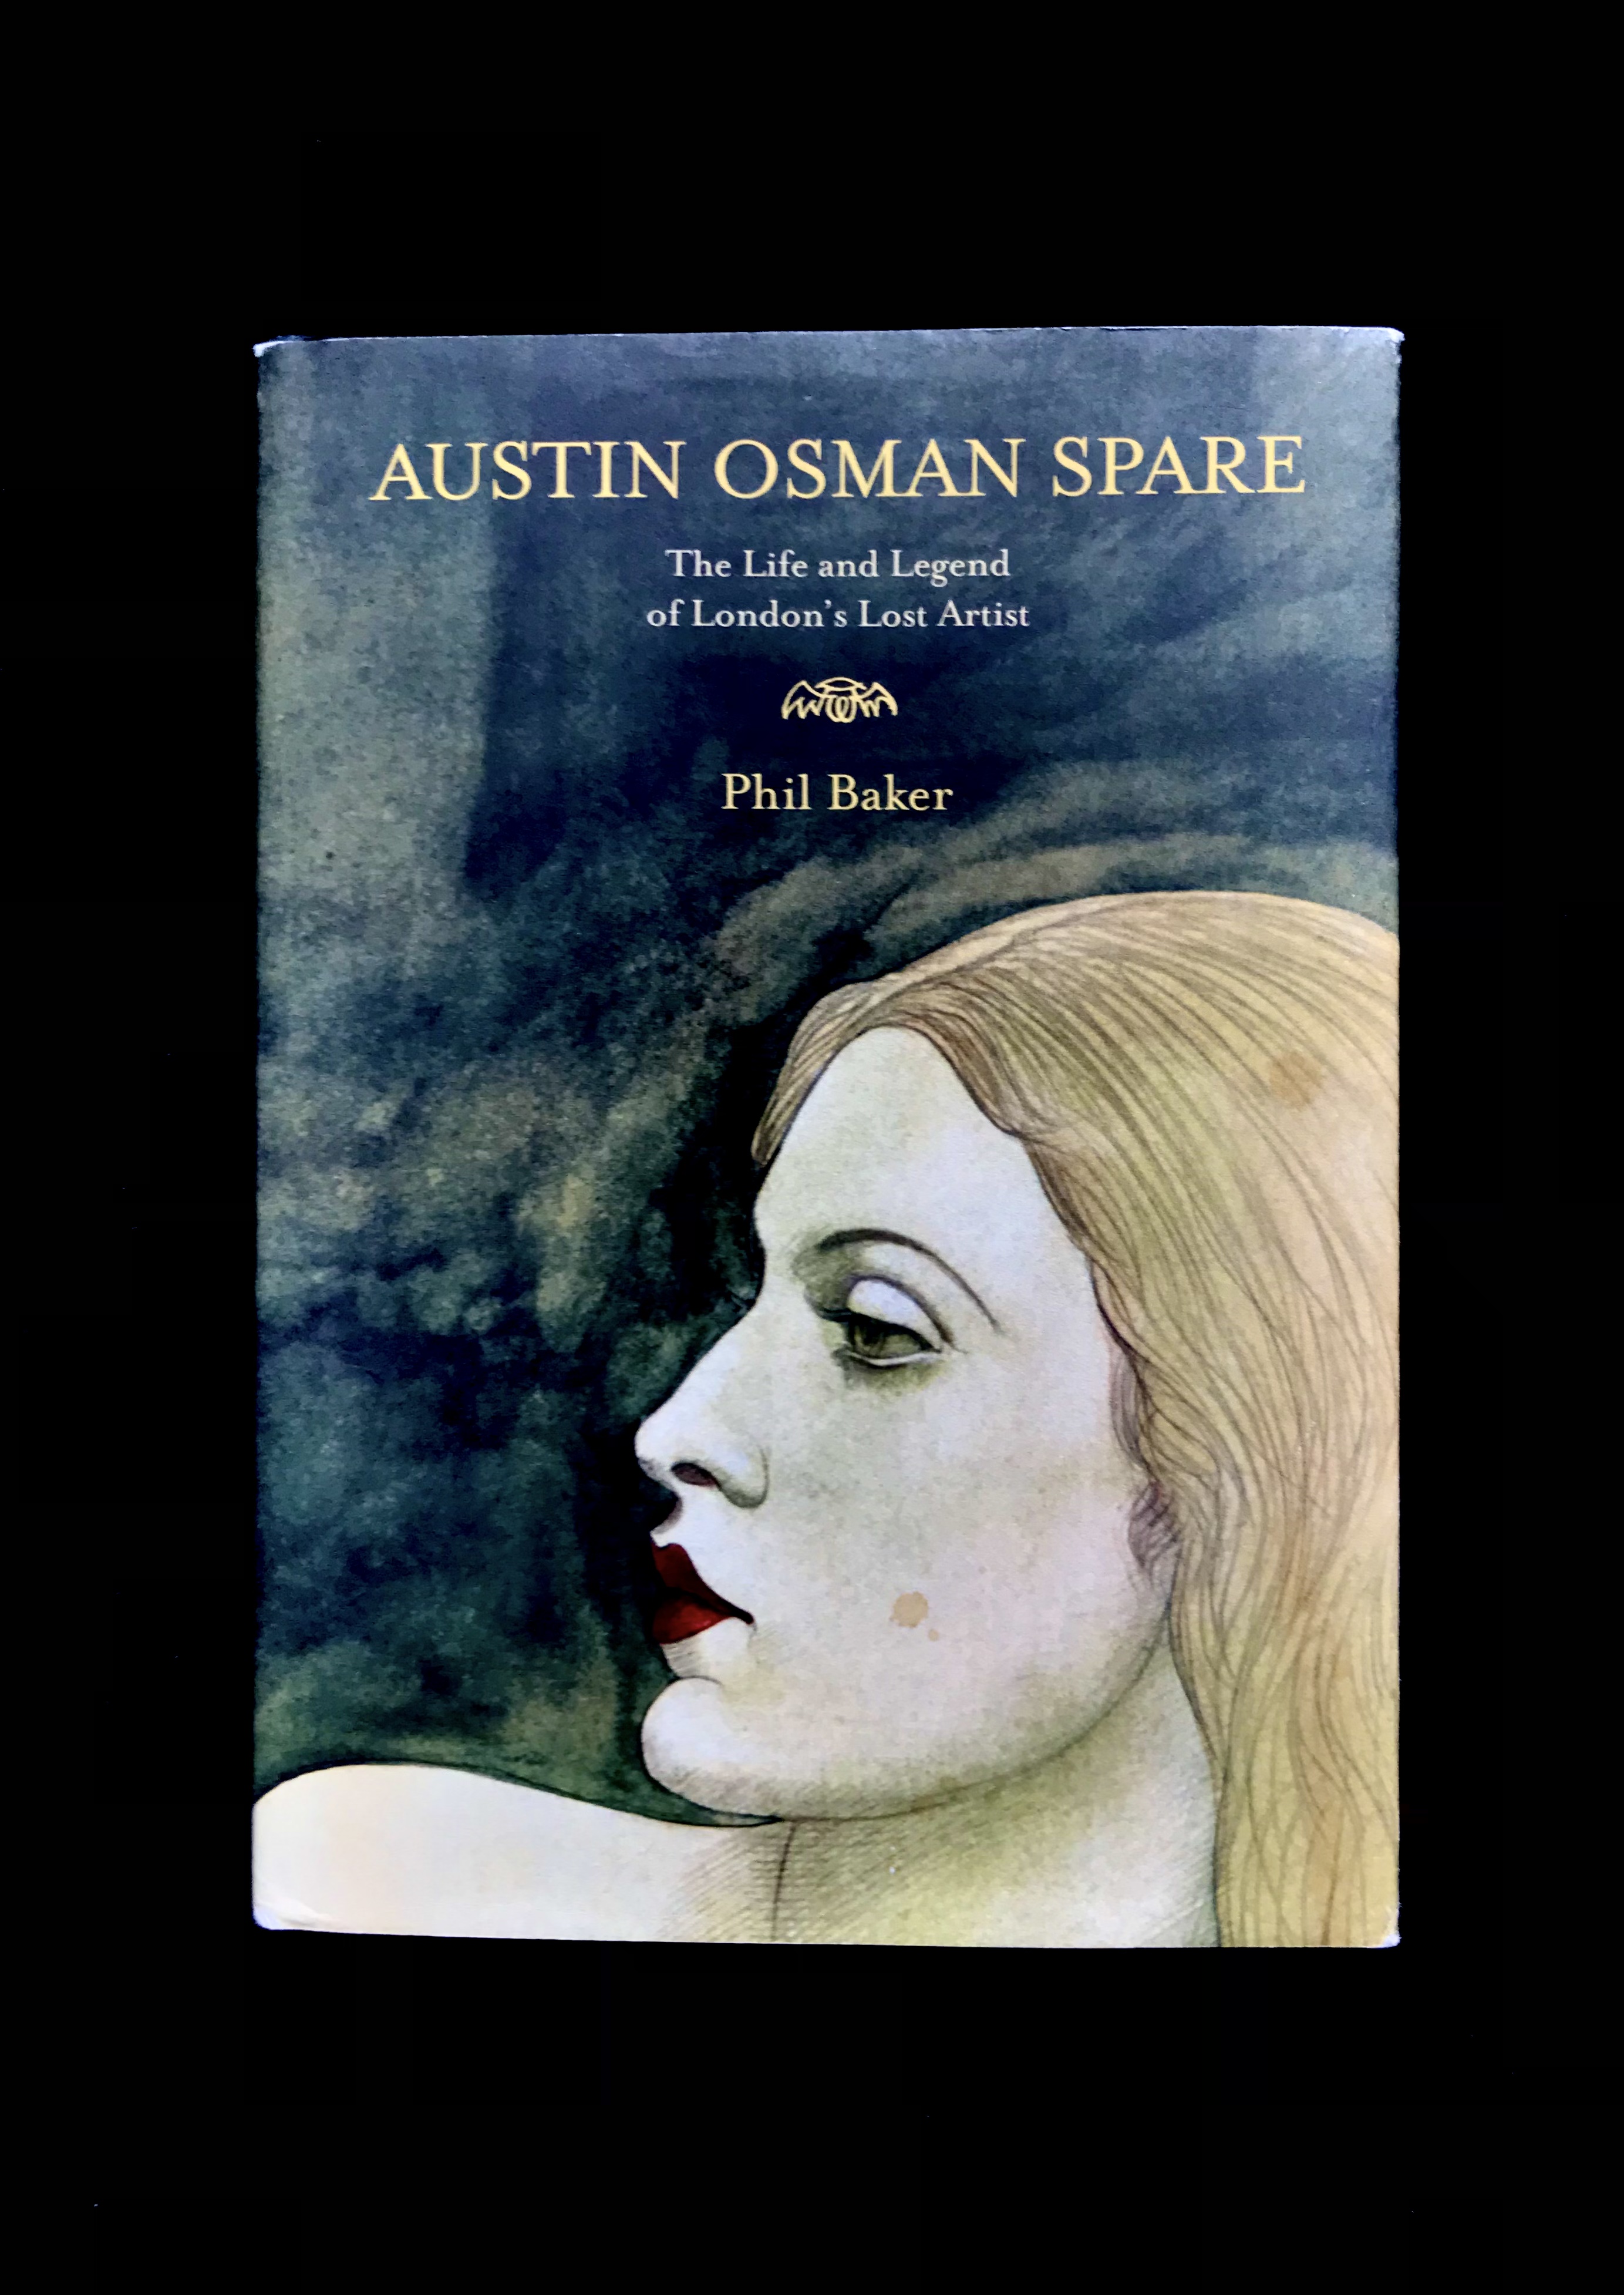 Austin Osman Spare: The Life and Legend of London's Lost Artist by Phil Baker